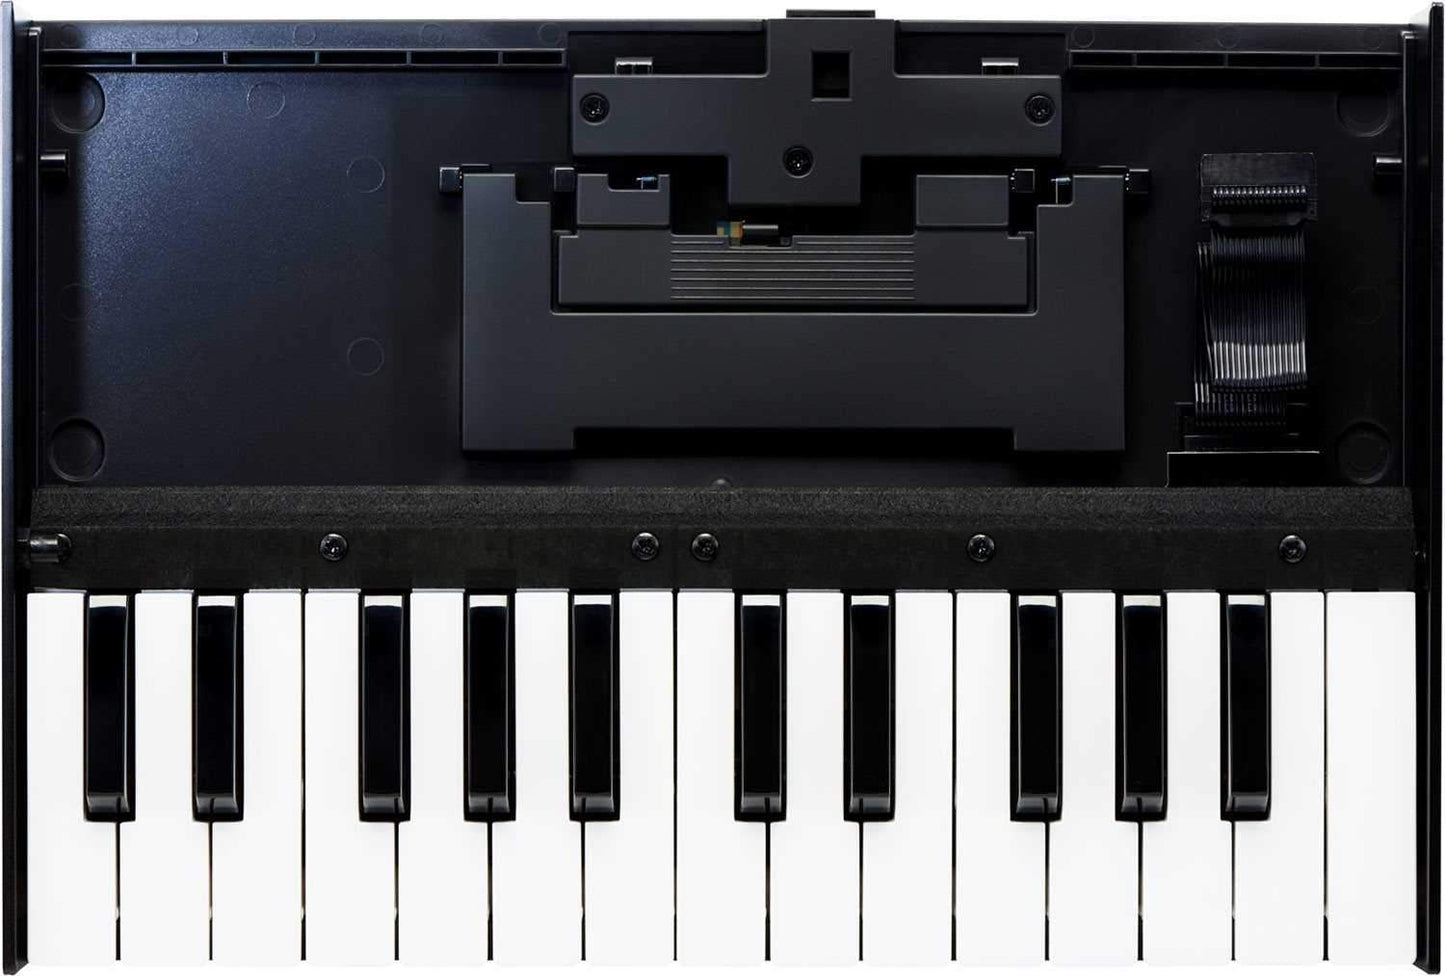 Roland K-25M Keyboard for Boutique Synth Modules - PSSL ProSound and Stage Lighting